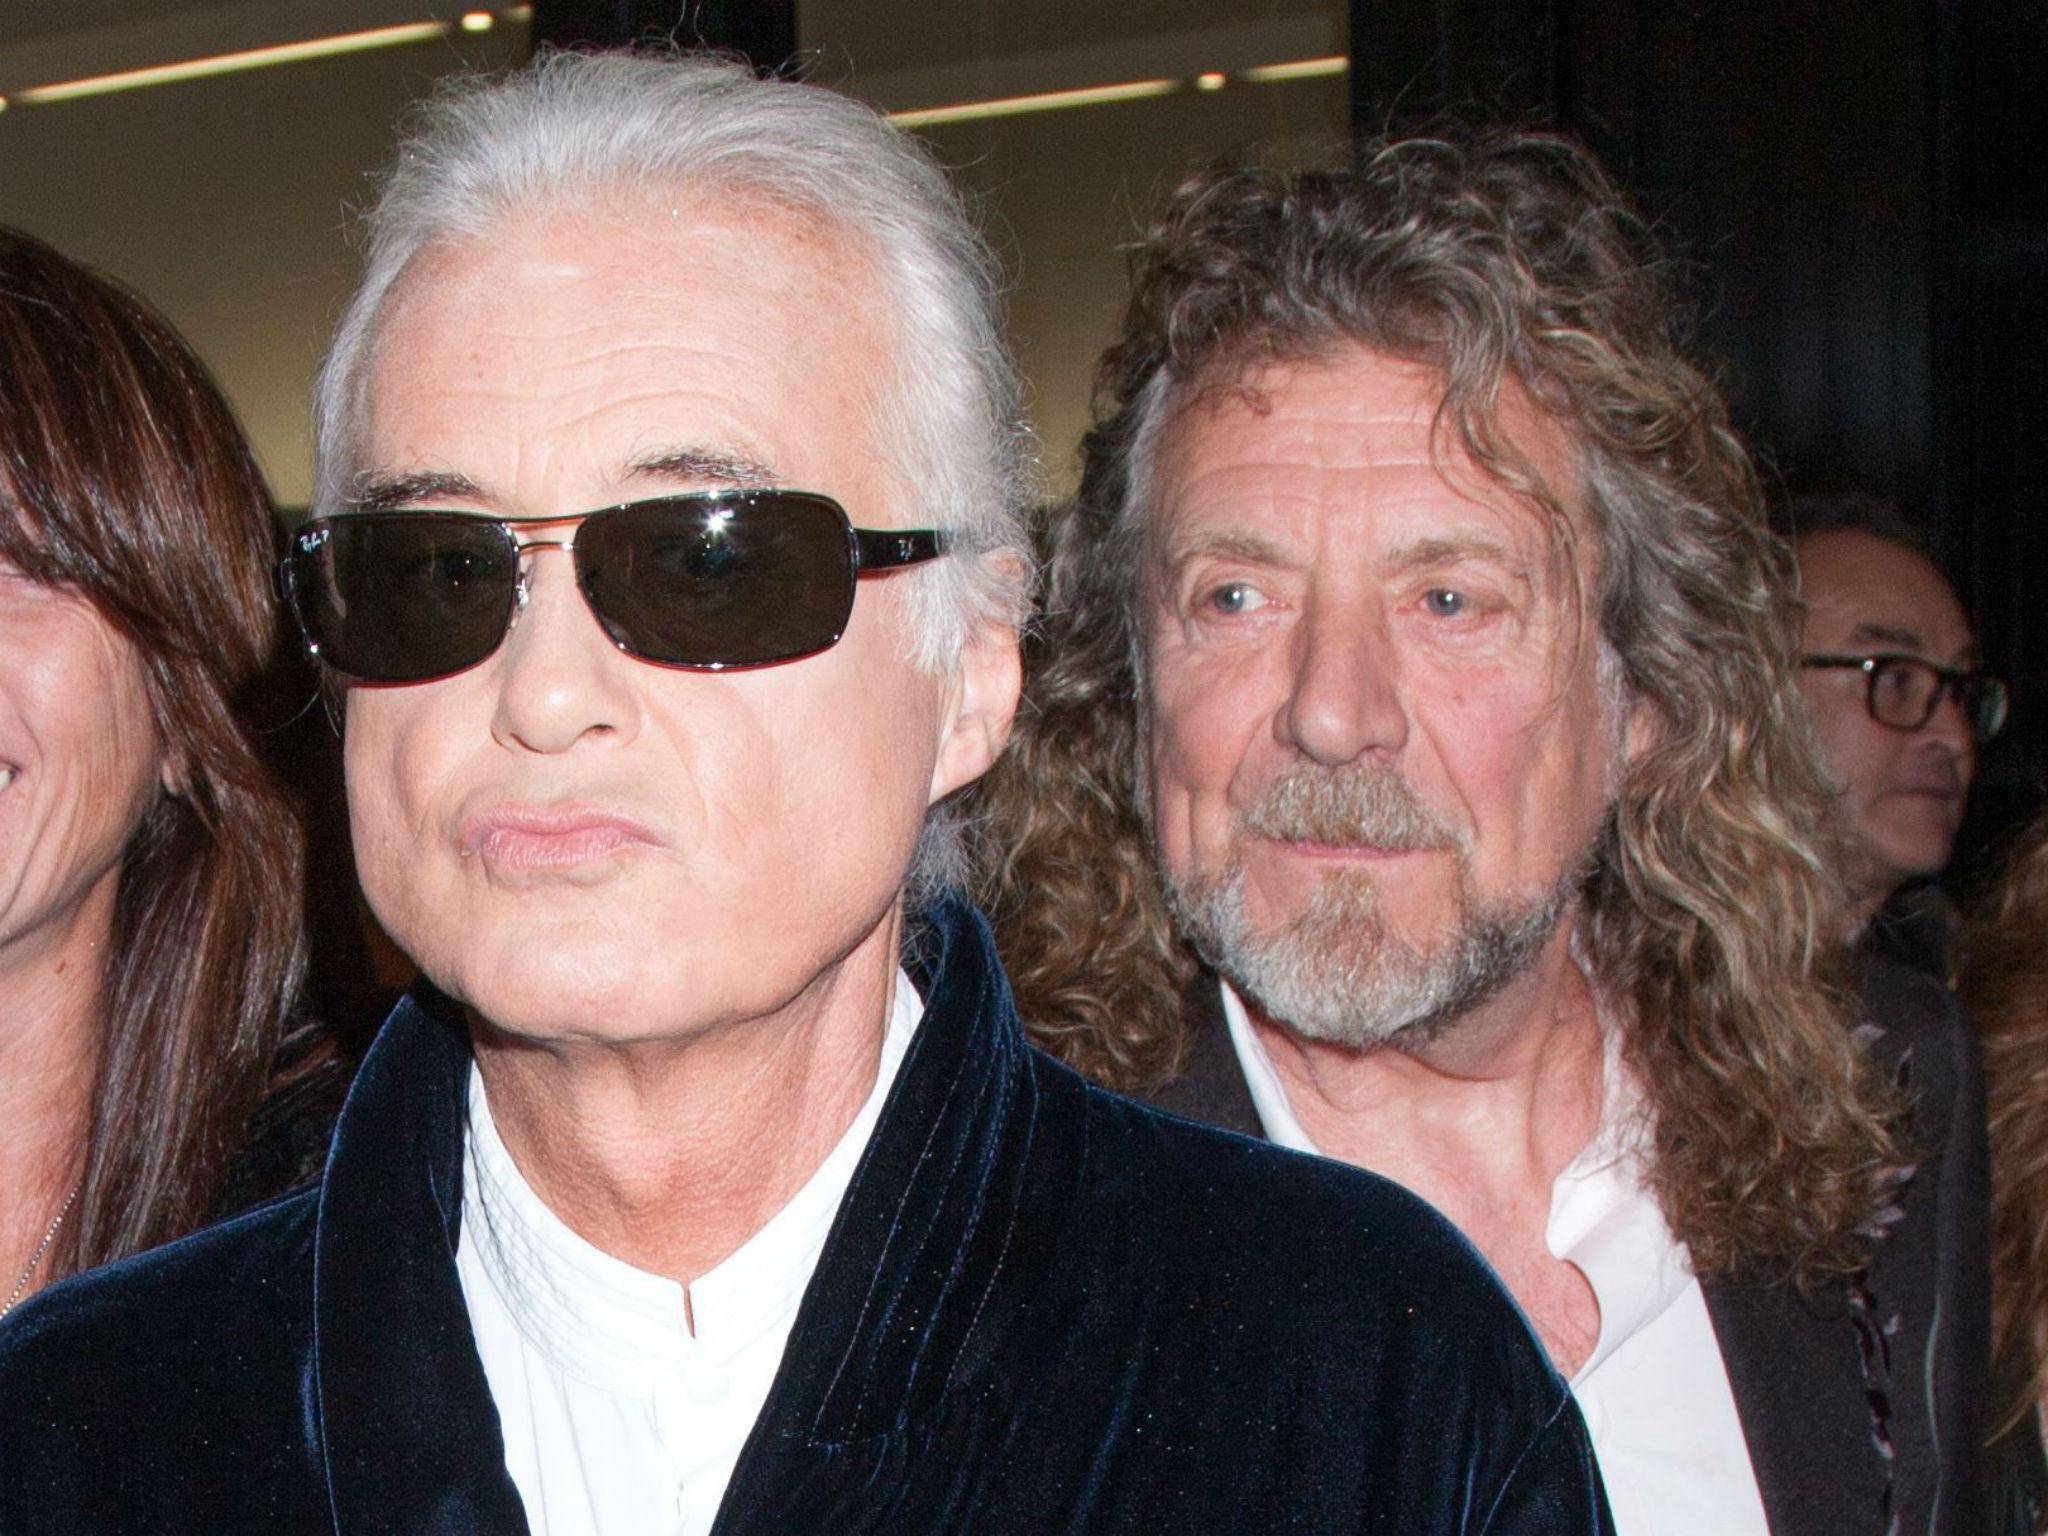 Led Zeppelin guitarist Jimmy Page and frontman Robert Plant, here attending a film premiere in 2012